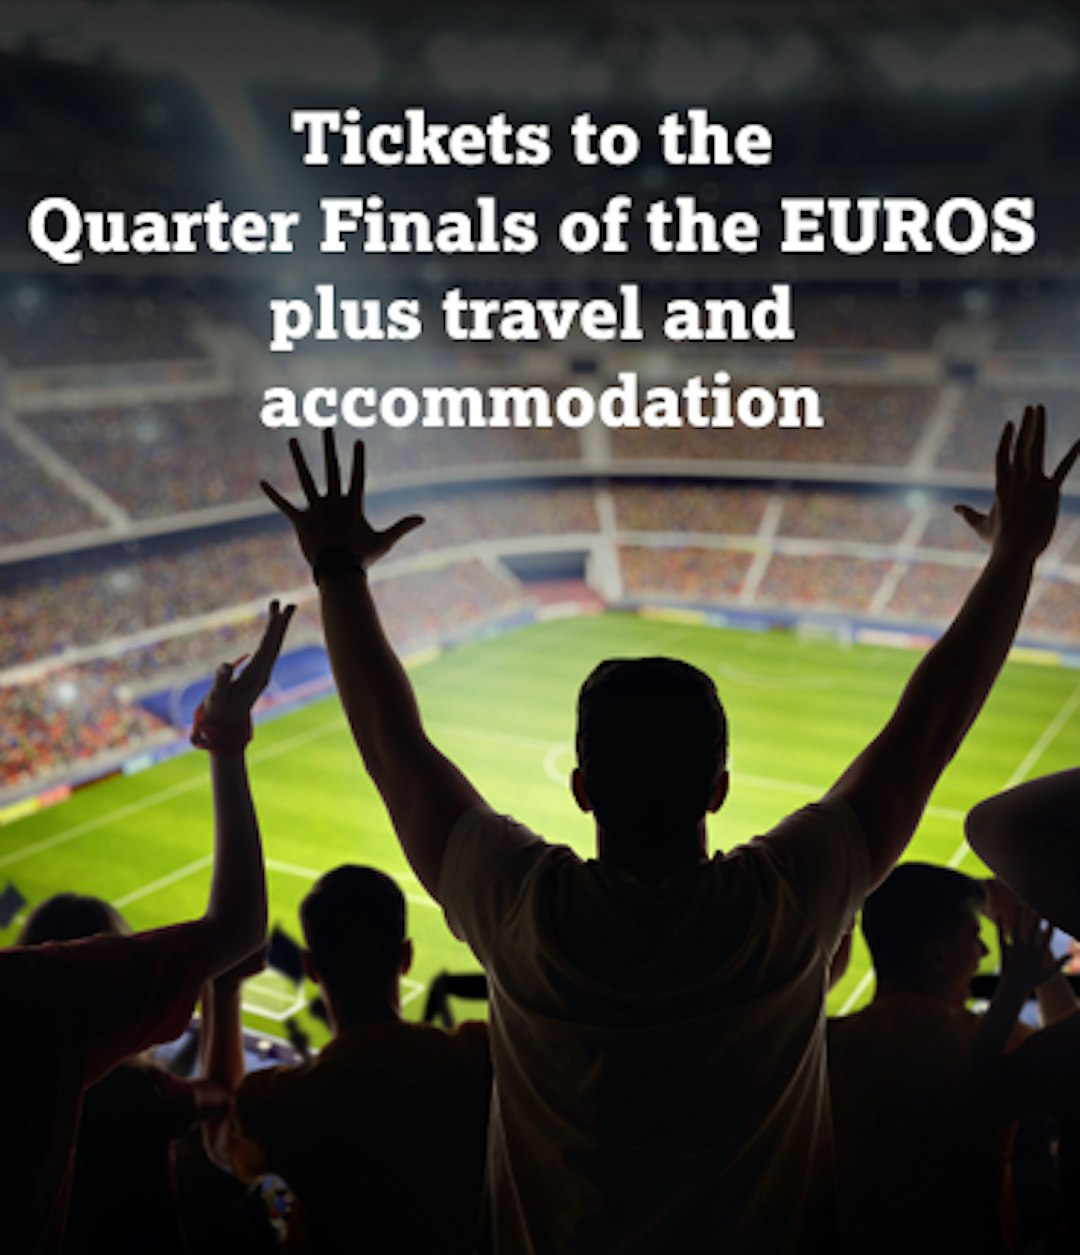 Win tickets to the quarter finals of the Euros